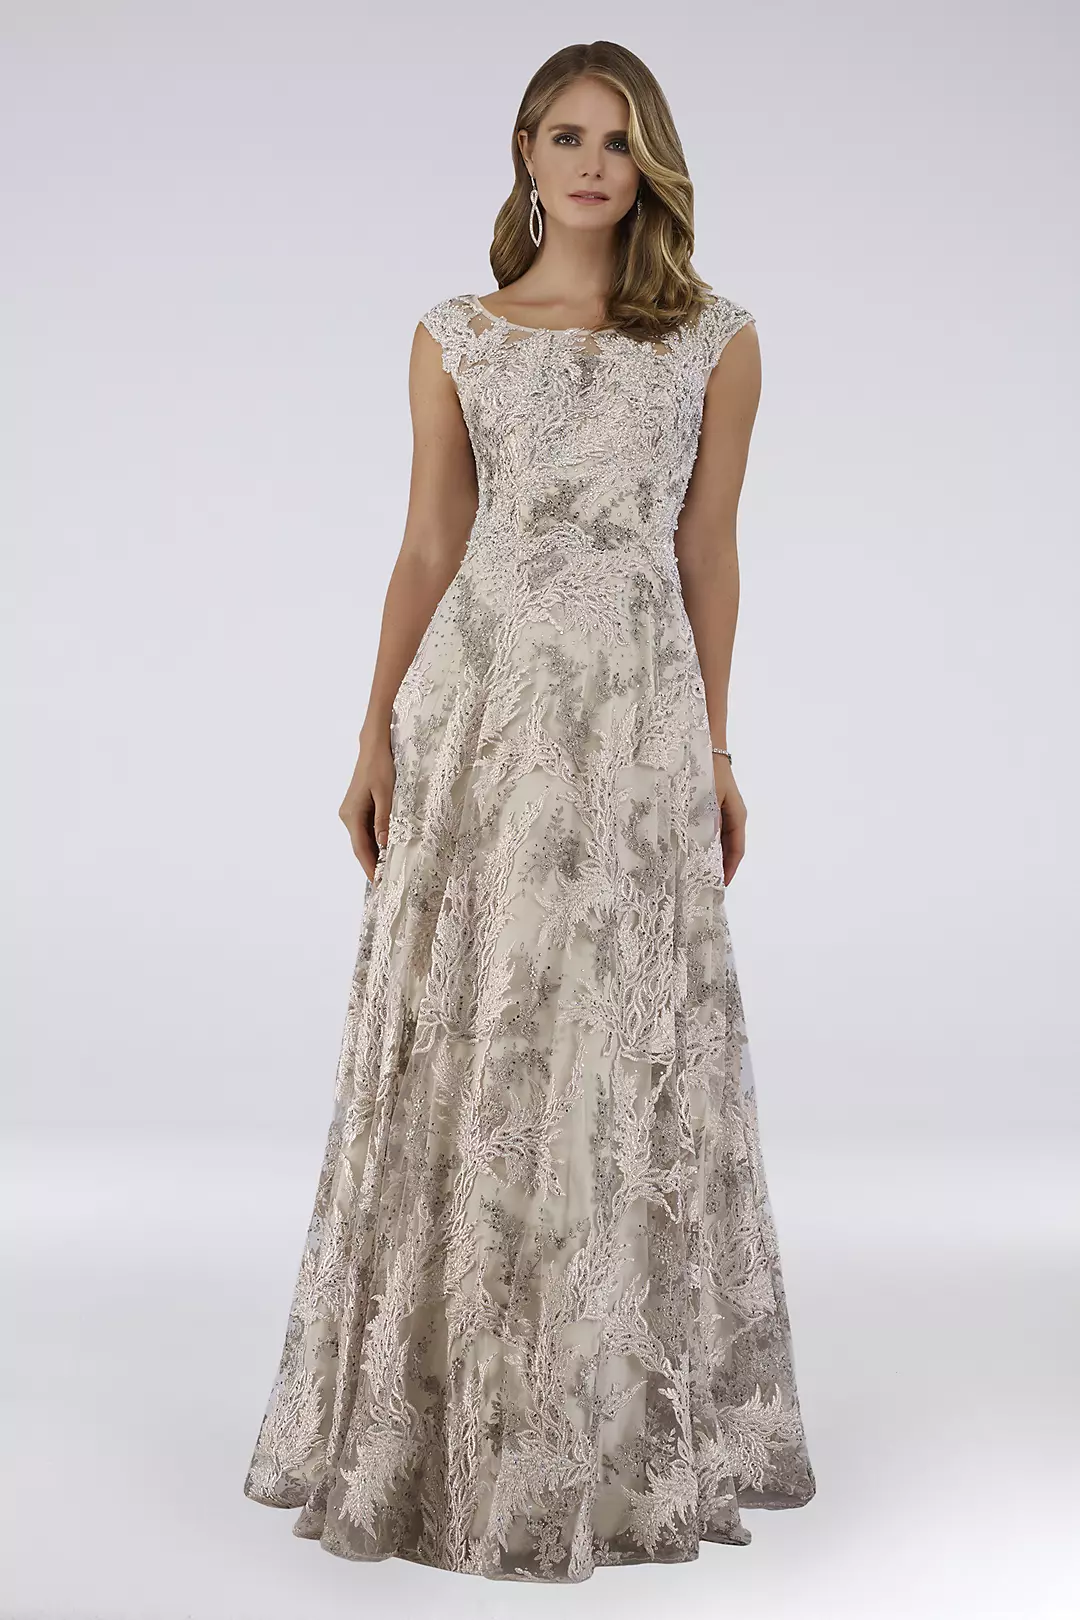 Lara Contrast Lace Scoopneck Cap Sleeve Ball Gown Image